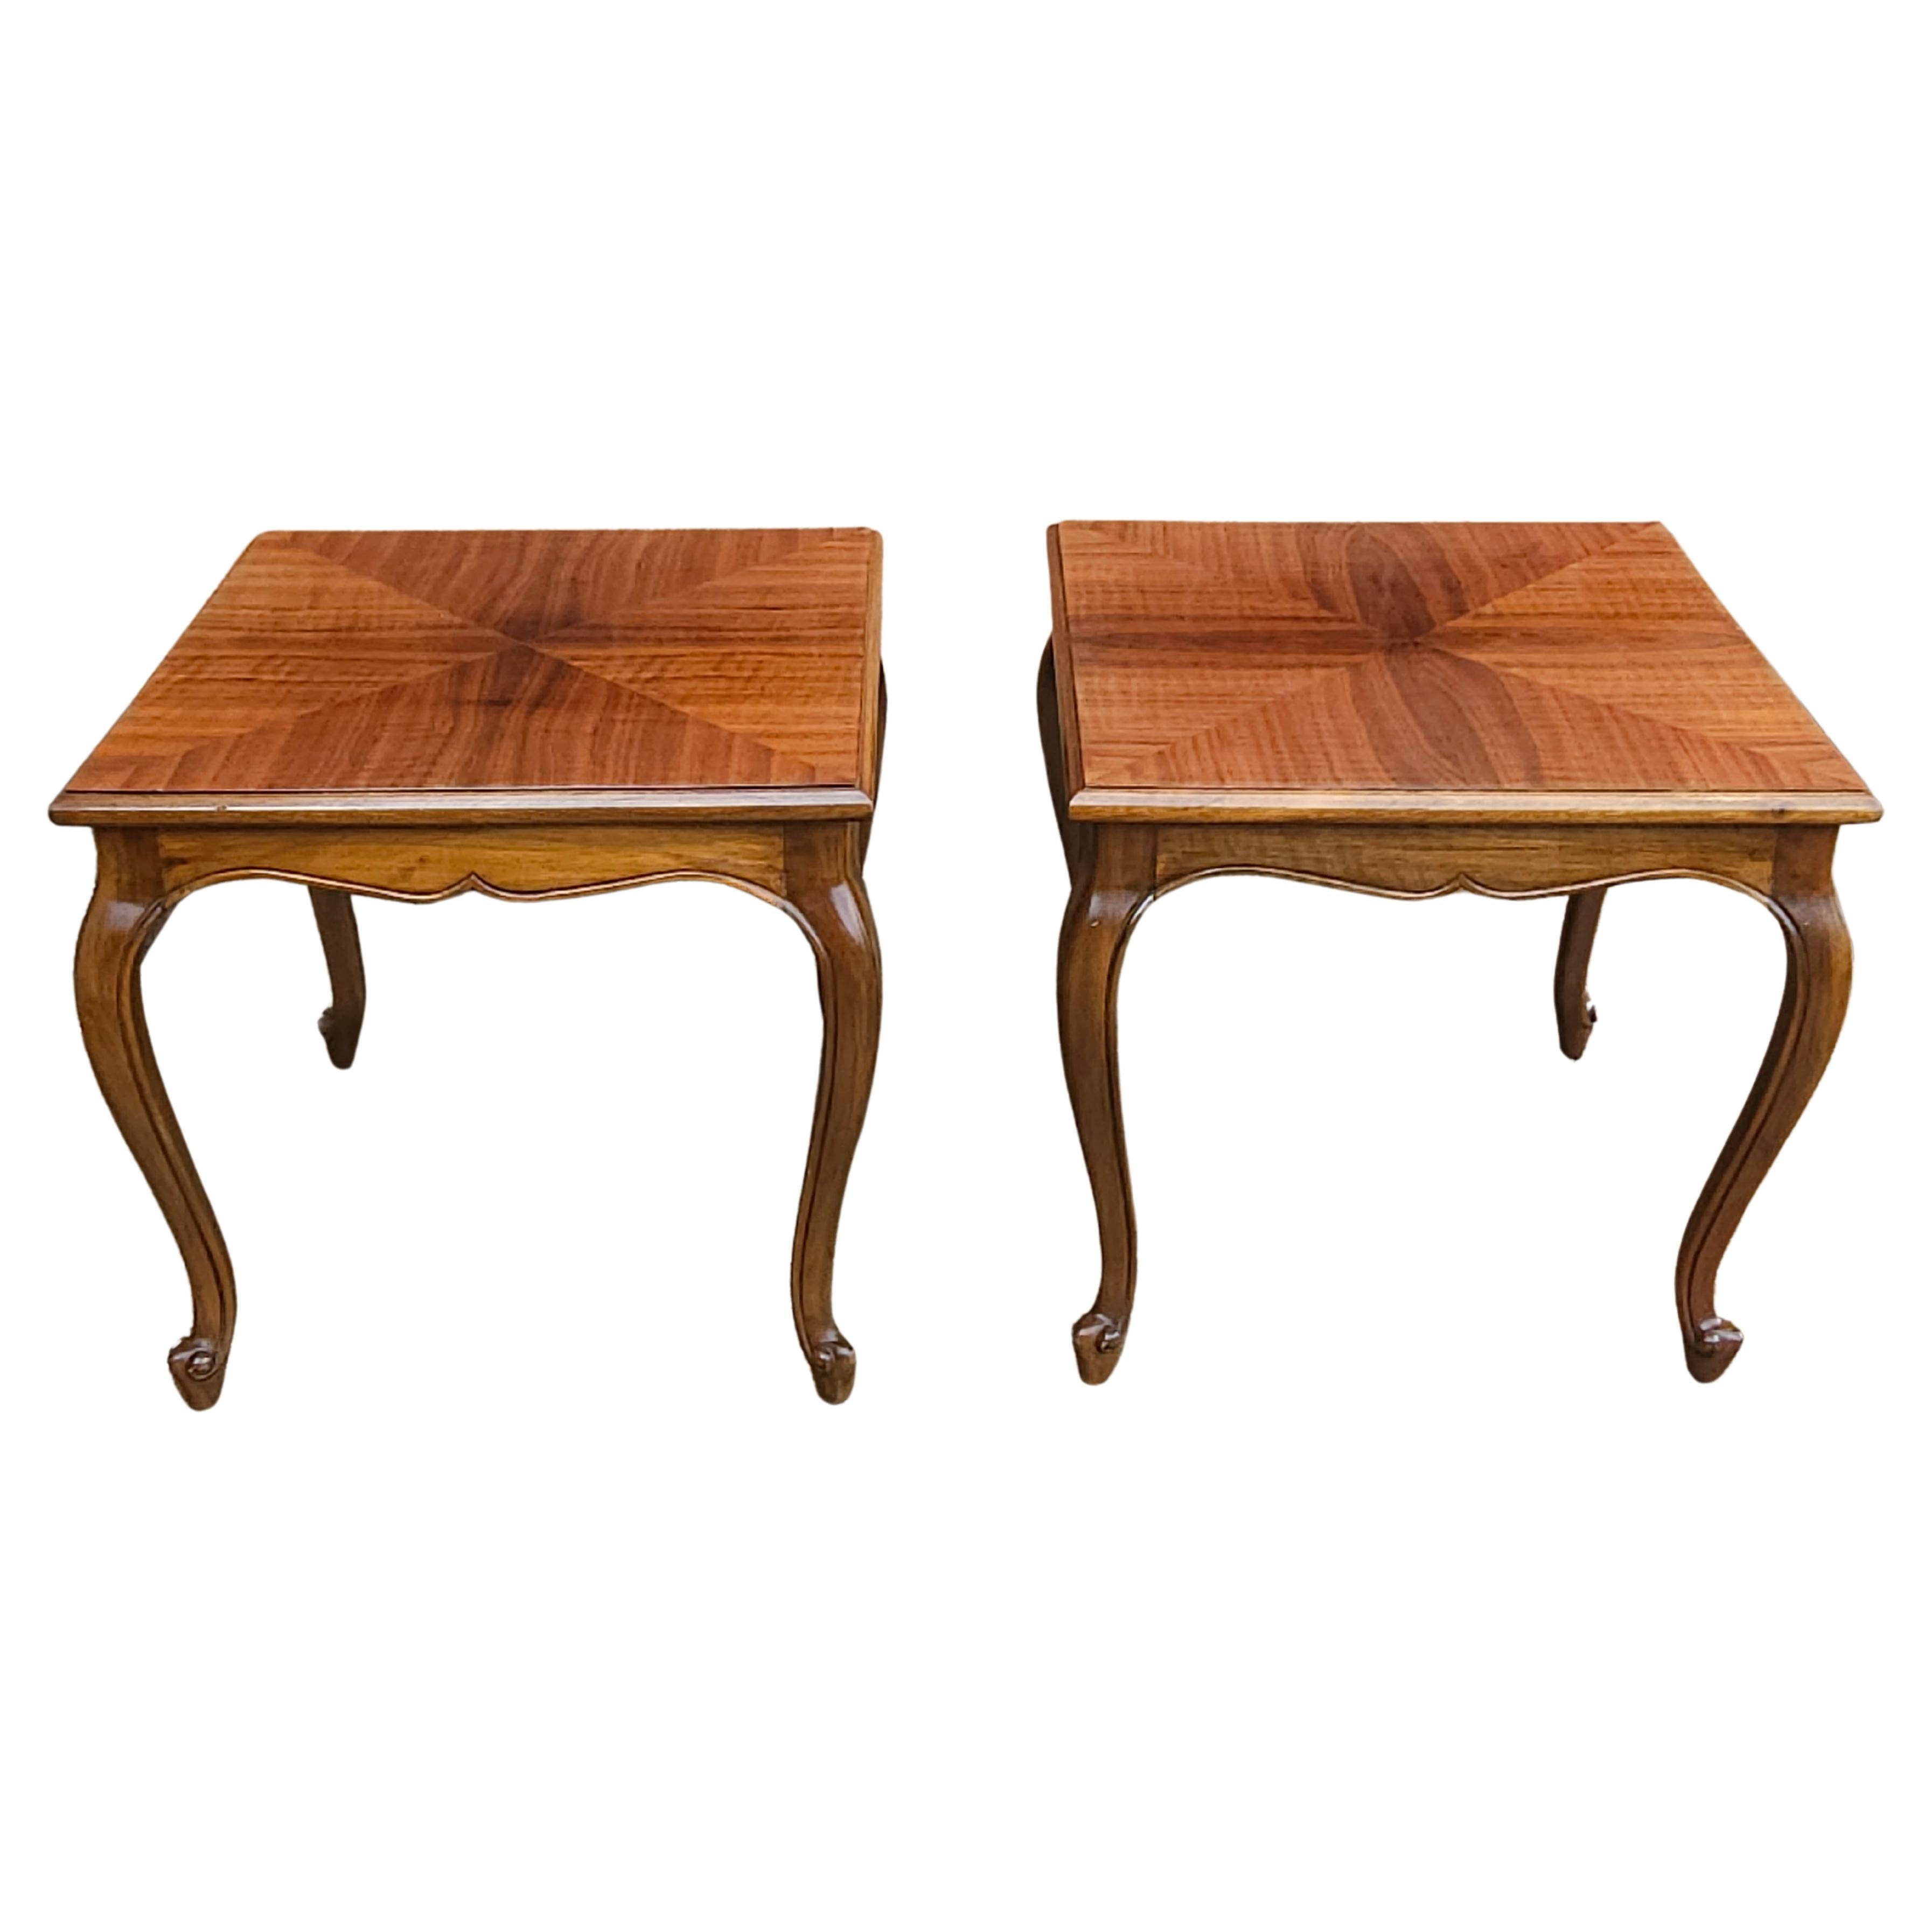 20th C. Handcrafted Bookmatched Brazilian Rosewood Provincial Side Tables, Pair For Sale